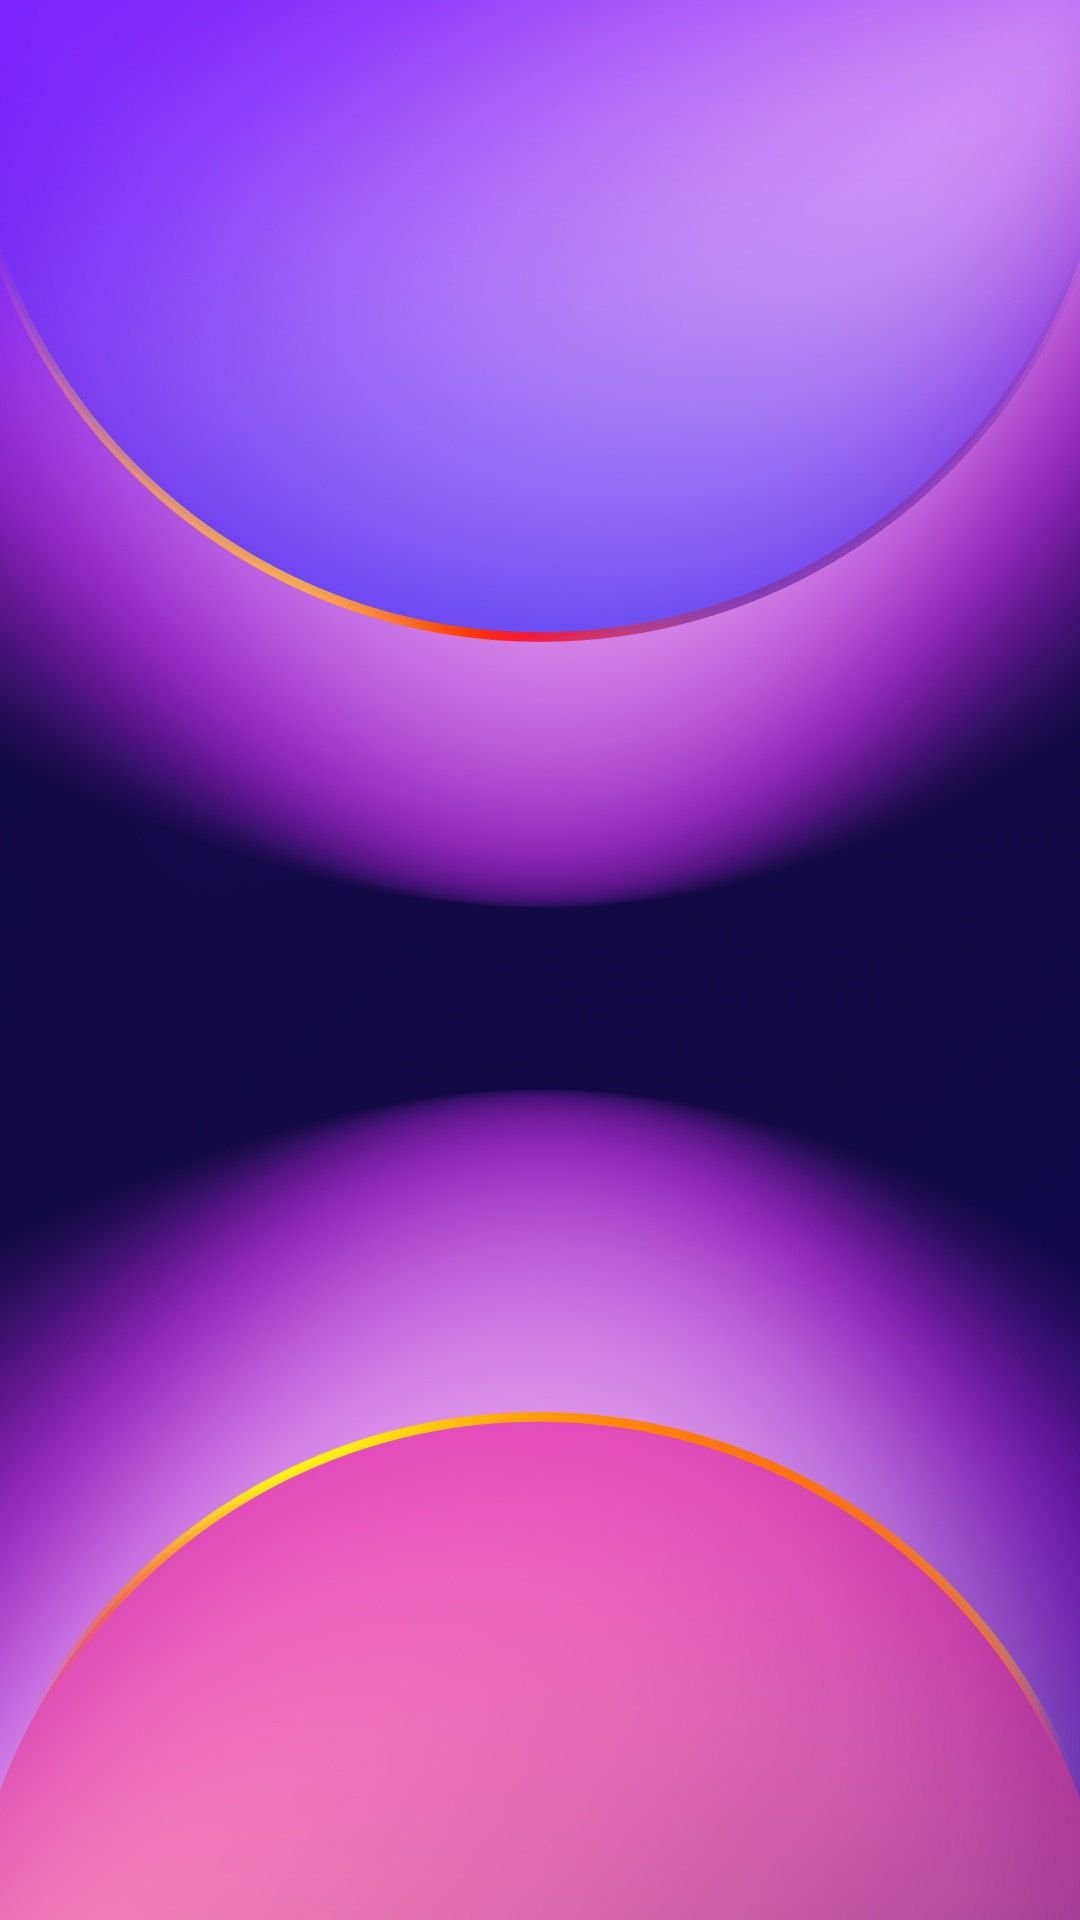 Circle, Apples, Ios, Colorfulness, Purple. Wallpaper in 1080x1920 Resolution